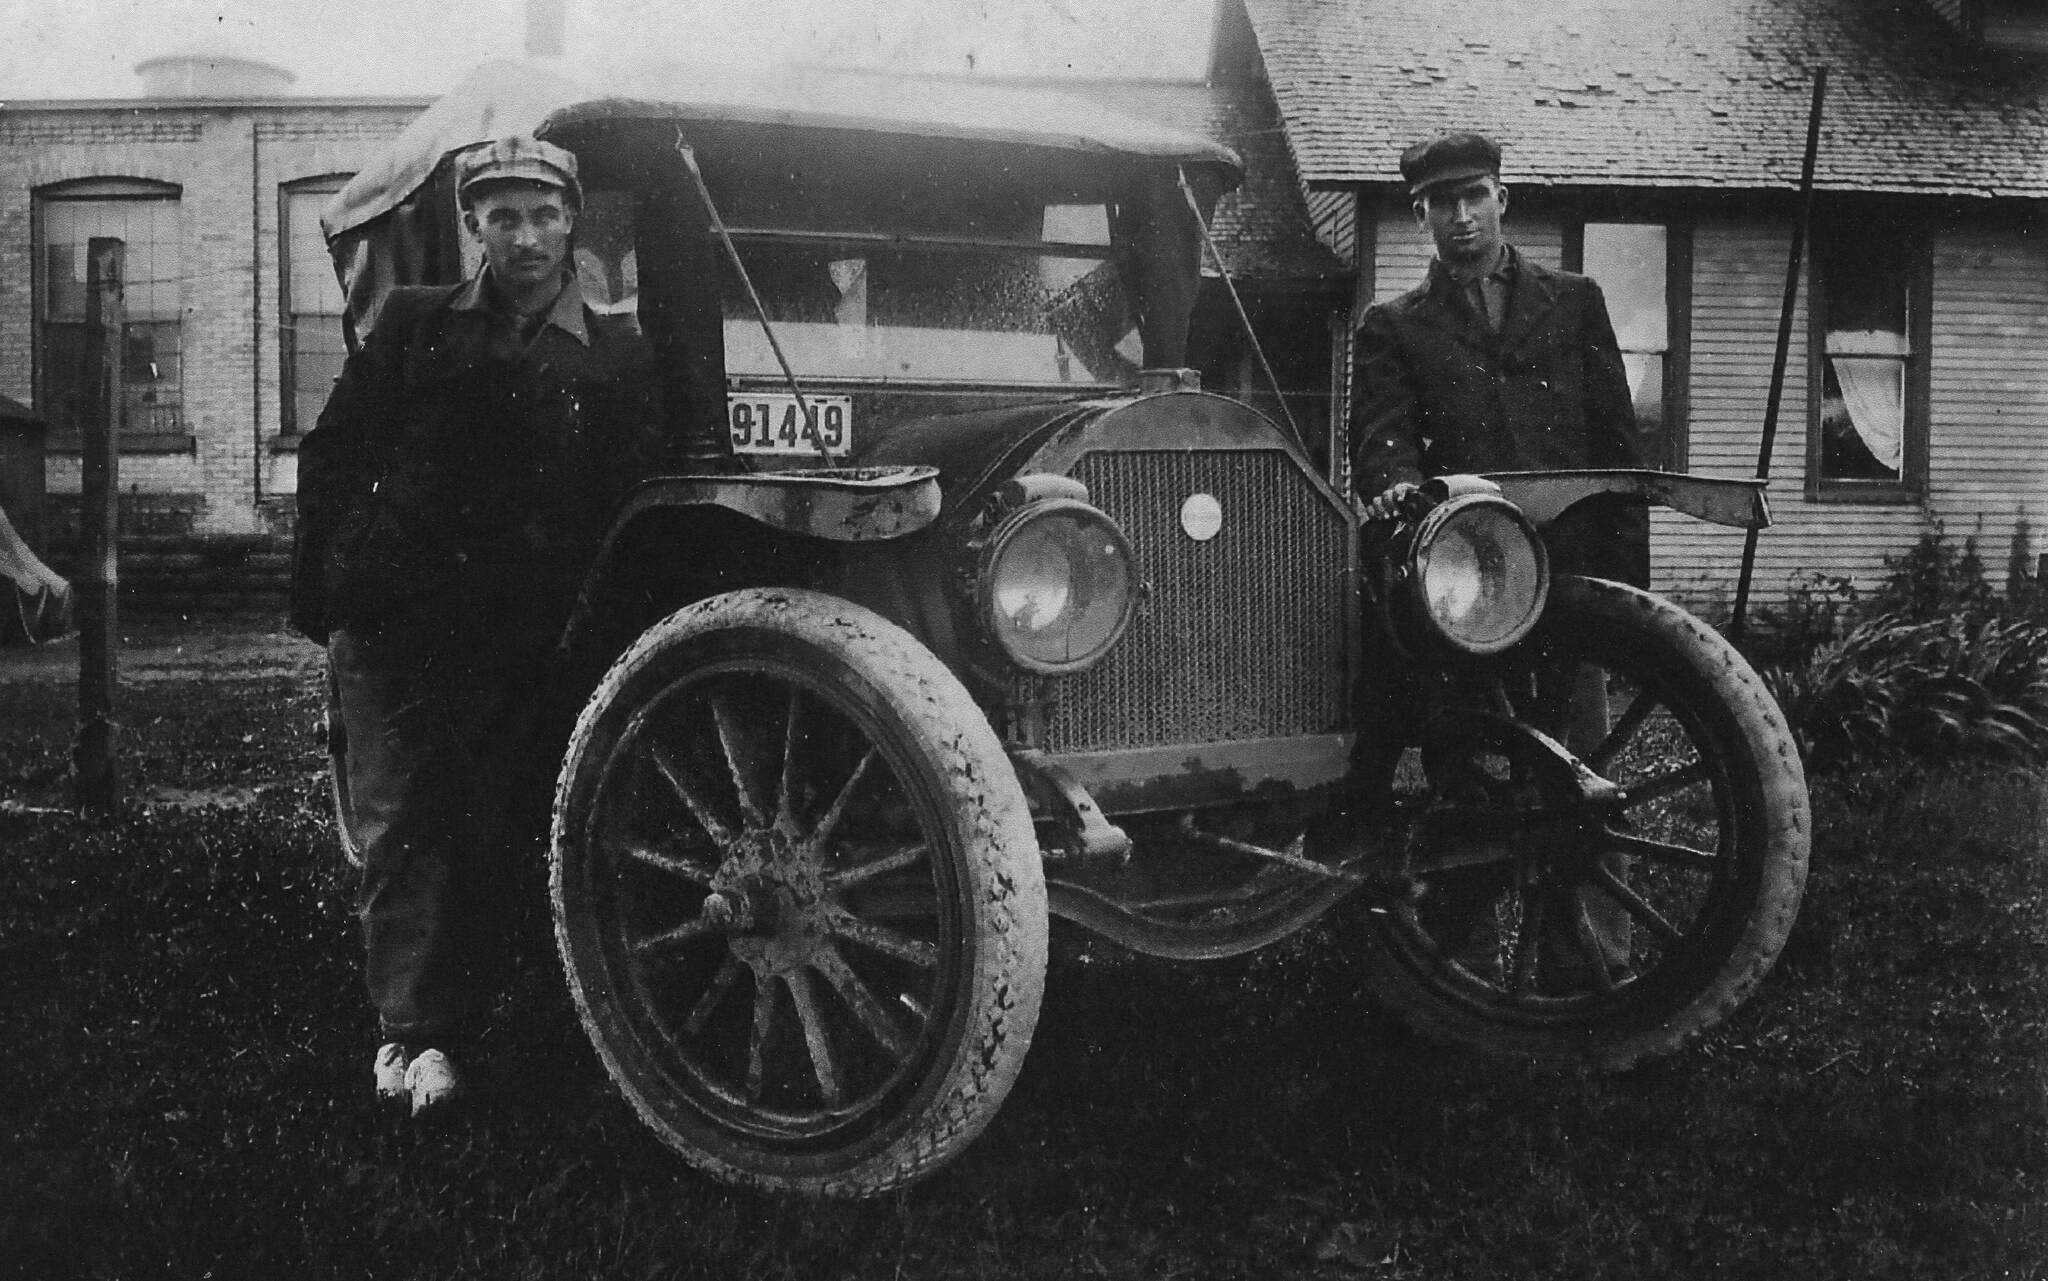 Brothers James (left) and Lawrence Keeler with their Kissel car, circa 1910s. Both brothers enlisted in the U.S. Army to fight in World War I. James was killed in battle. Photo courtesy of the Keeler Family Collection.